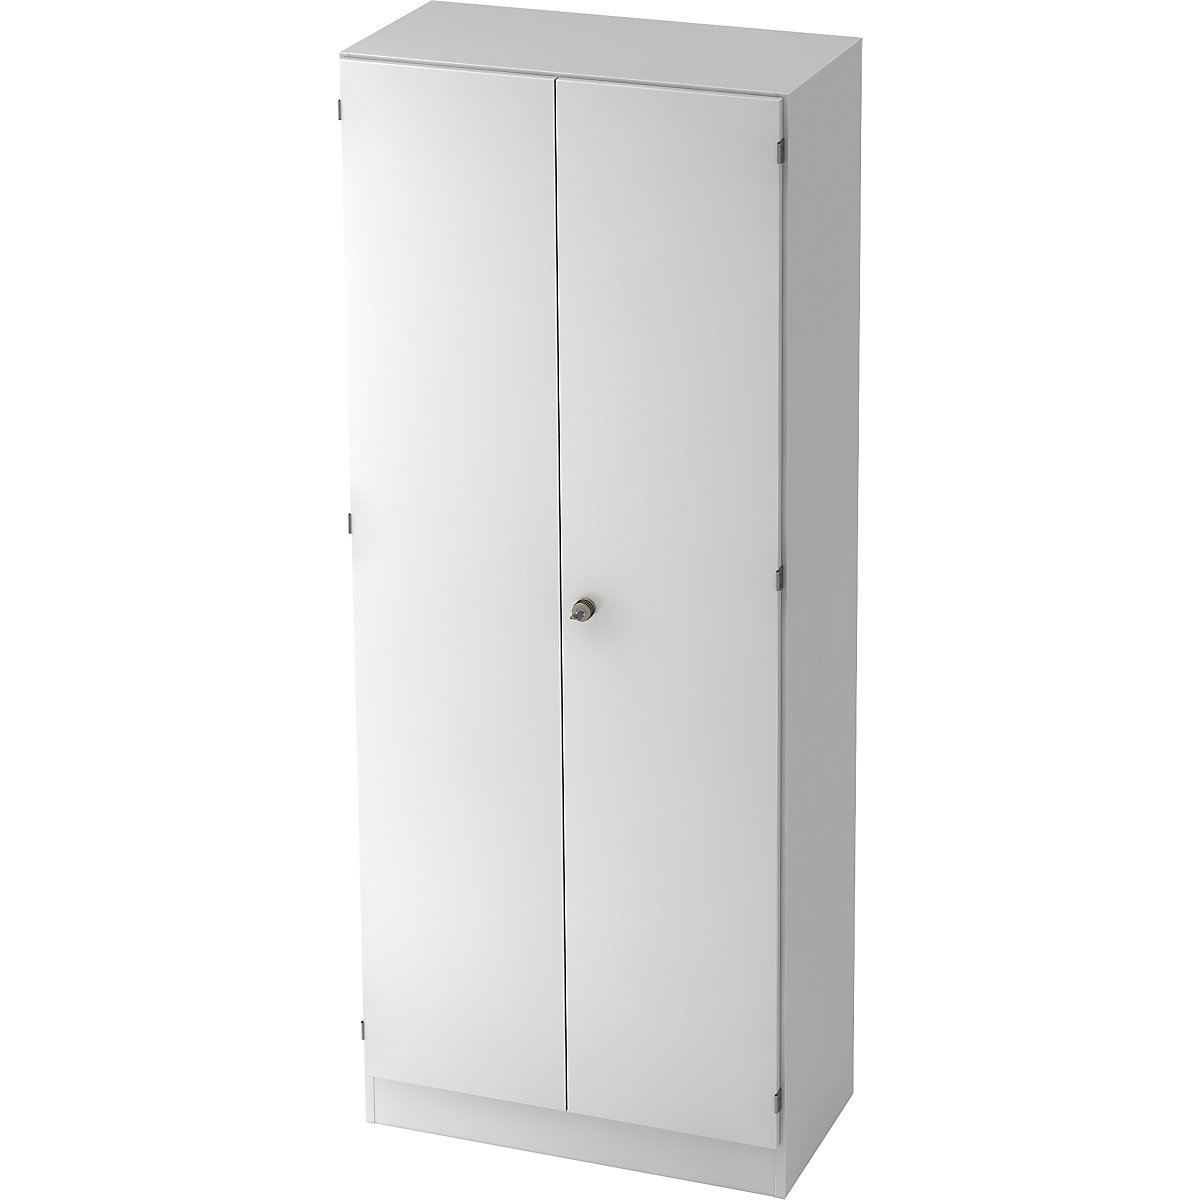 Cloakroom locker FINO, with 1 shelf and 1 clothes rail, white-7